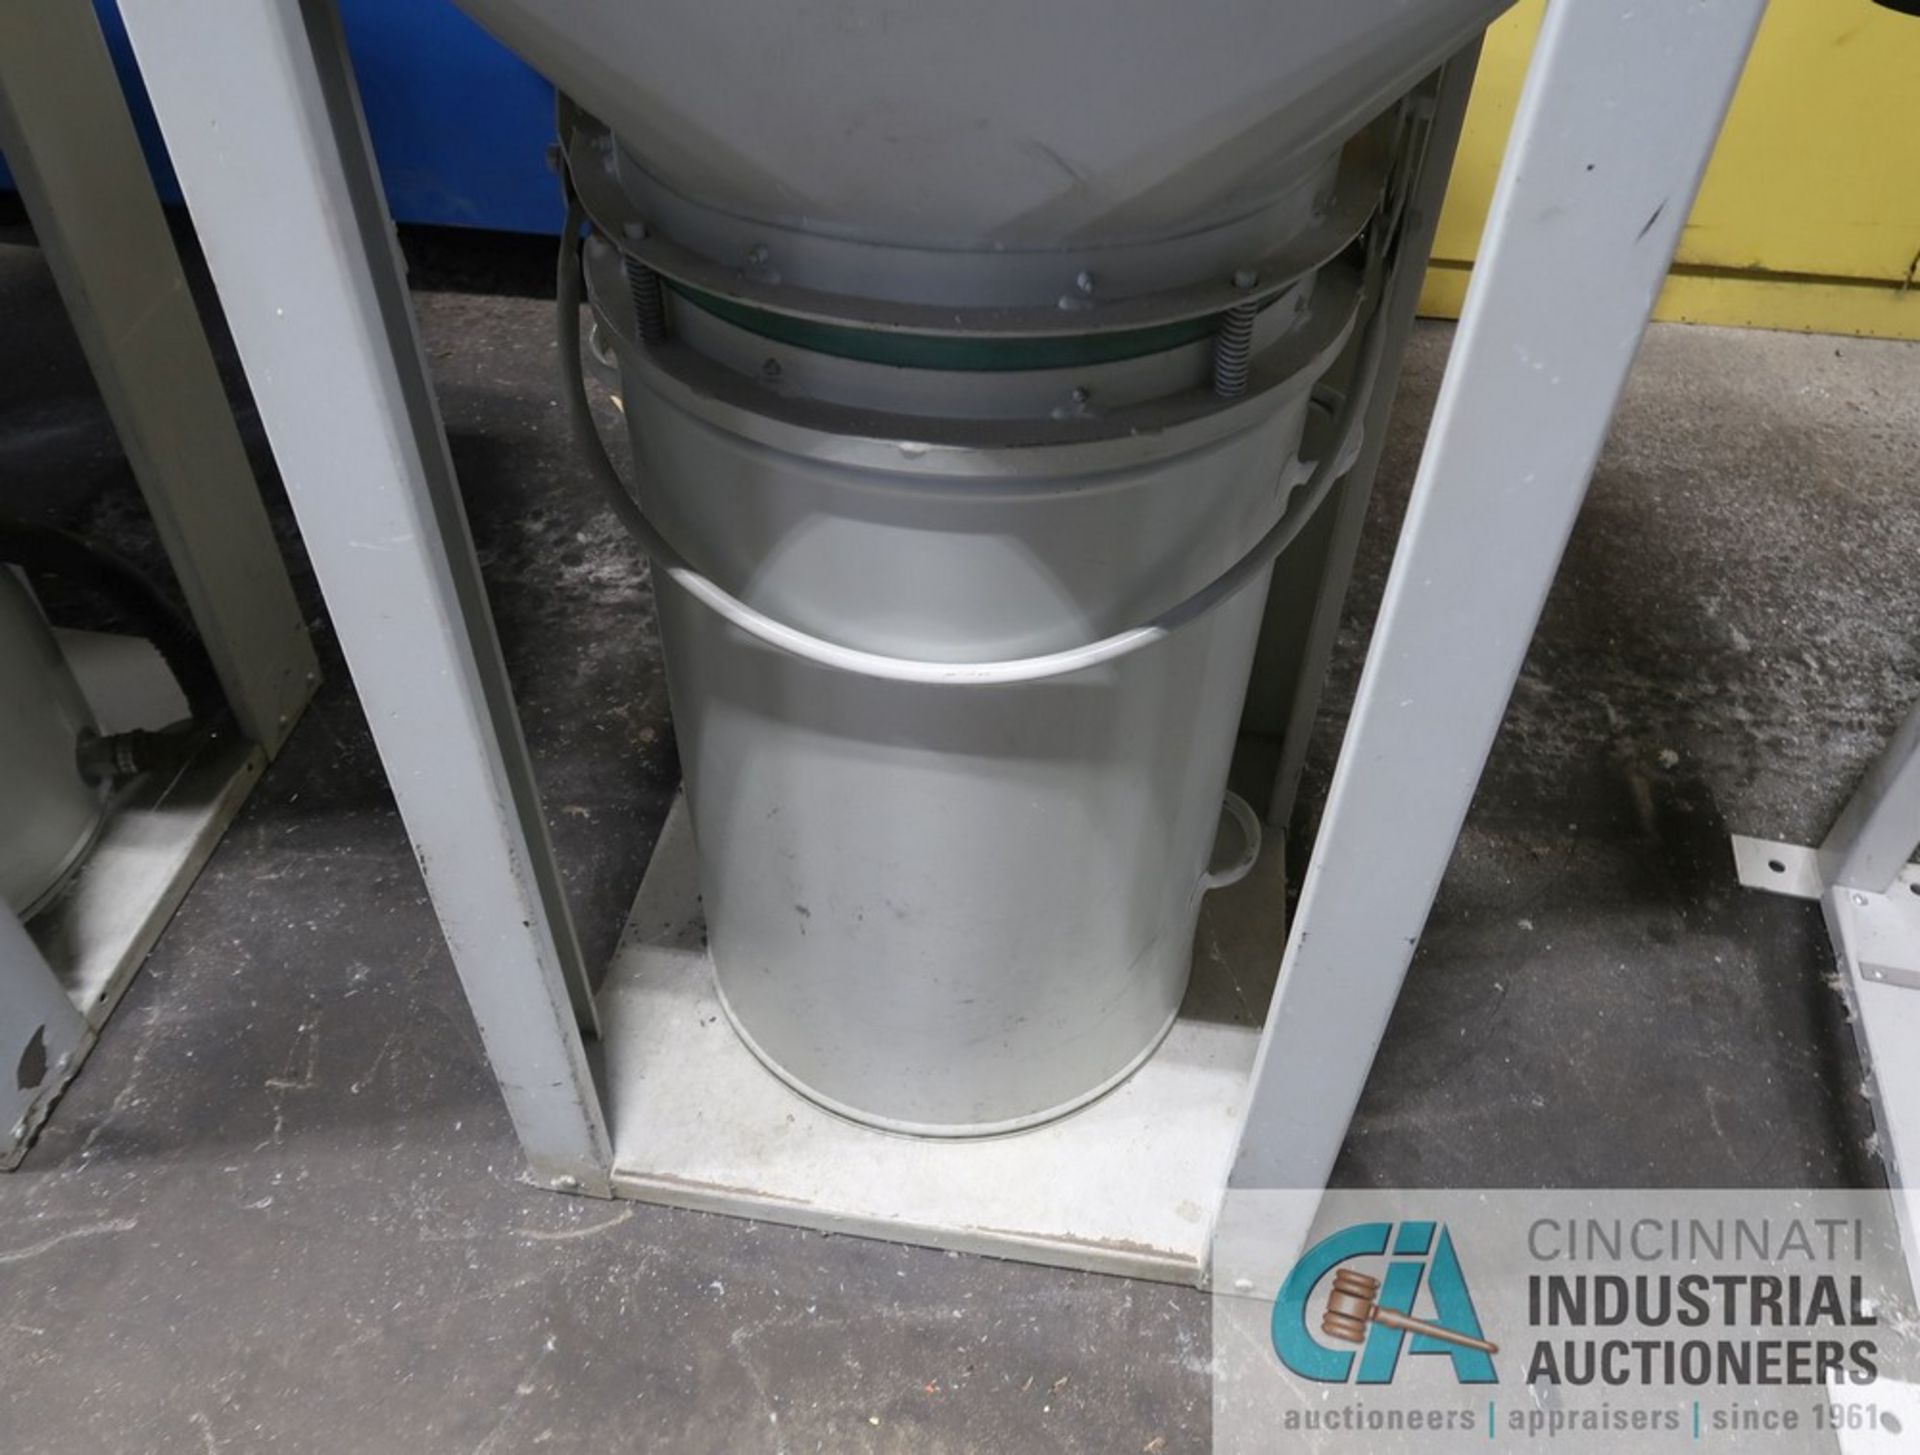 1 HP DCE UNIMASTER MODEL UMA73G1AD DUST COLLECTOR; S/N 98-1161/09 - From eyeglass lense - Image 2 of 4